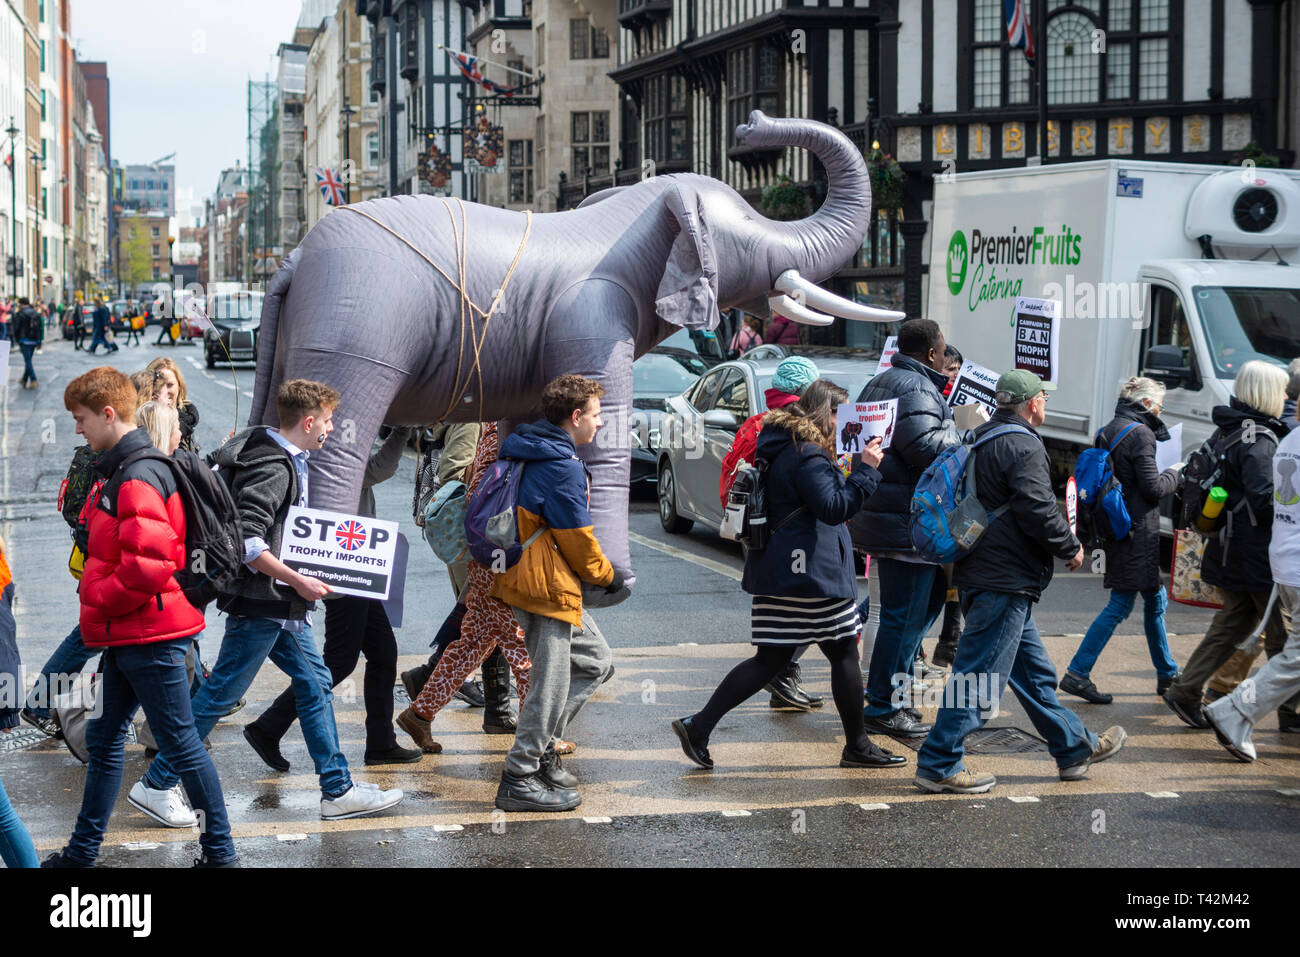 Protesters carry an inflatable elephant through streets of london at a stop trophy hunting and ivory trade protest rally, London, UK. Crossing the road Stock Photo